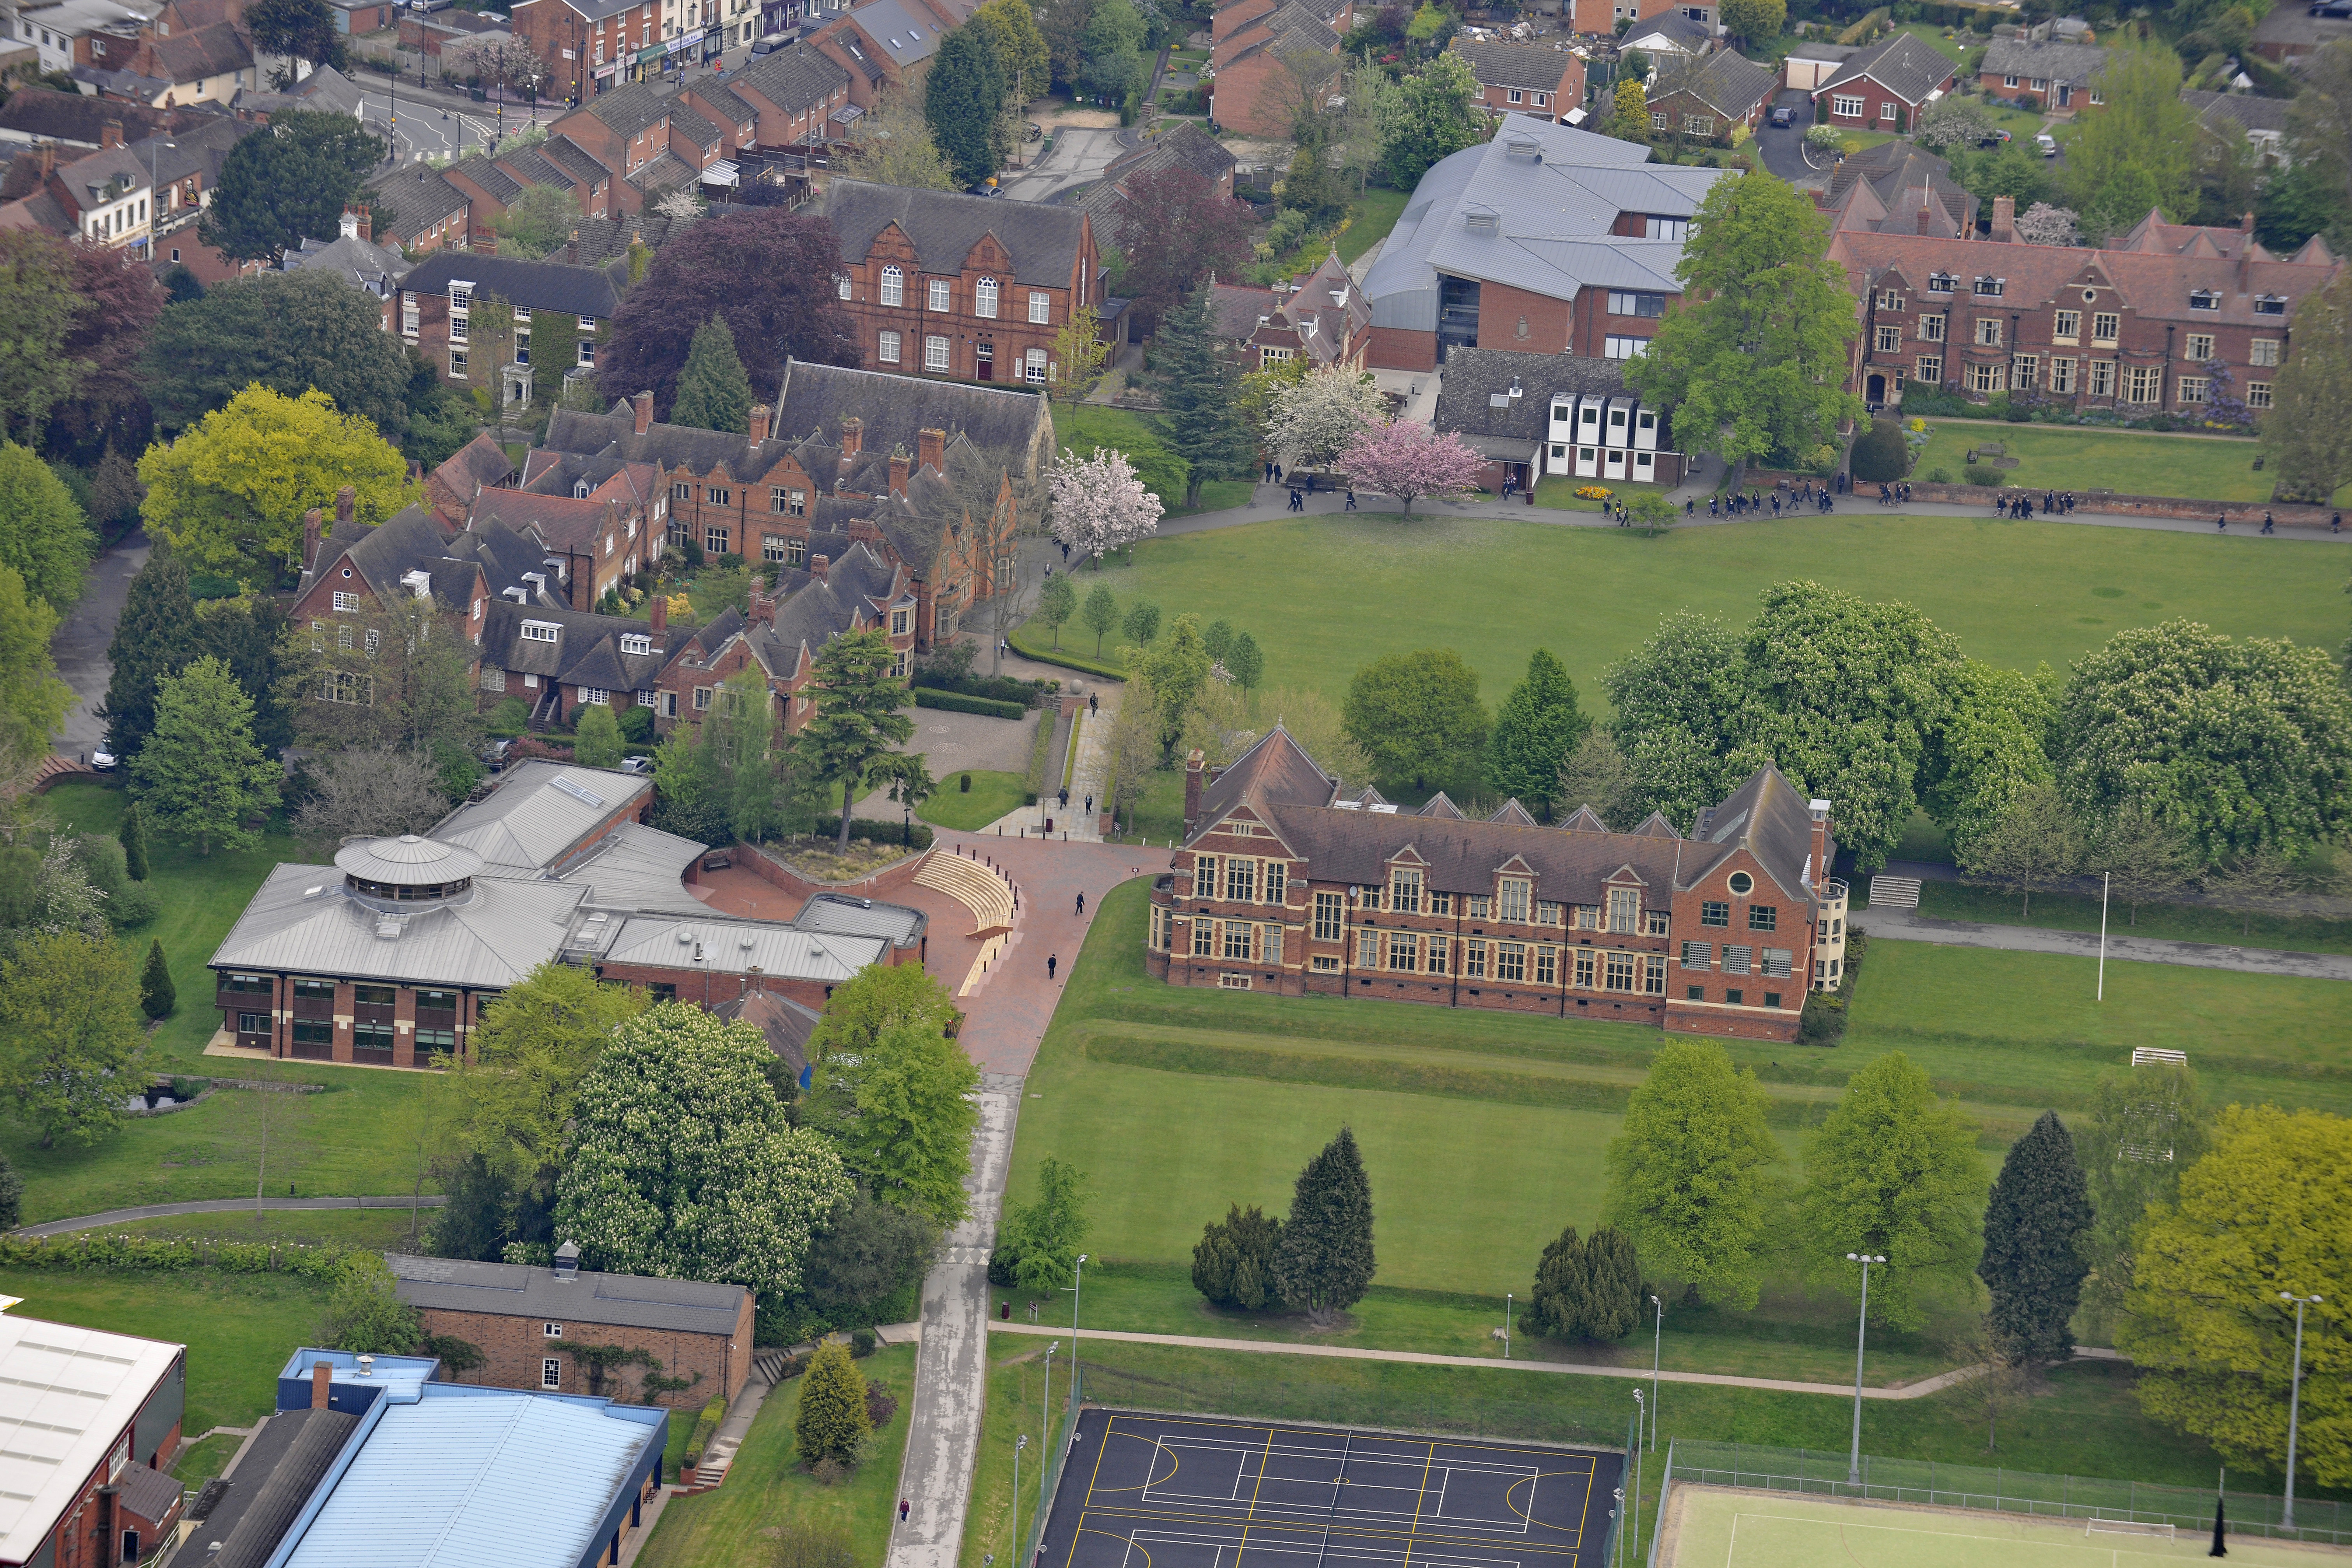 Bromsgrove School from the air